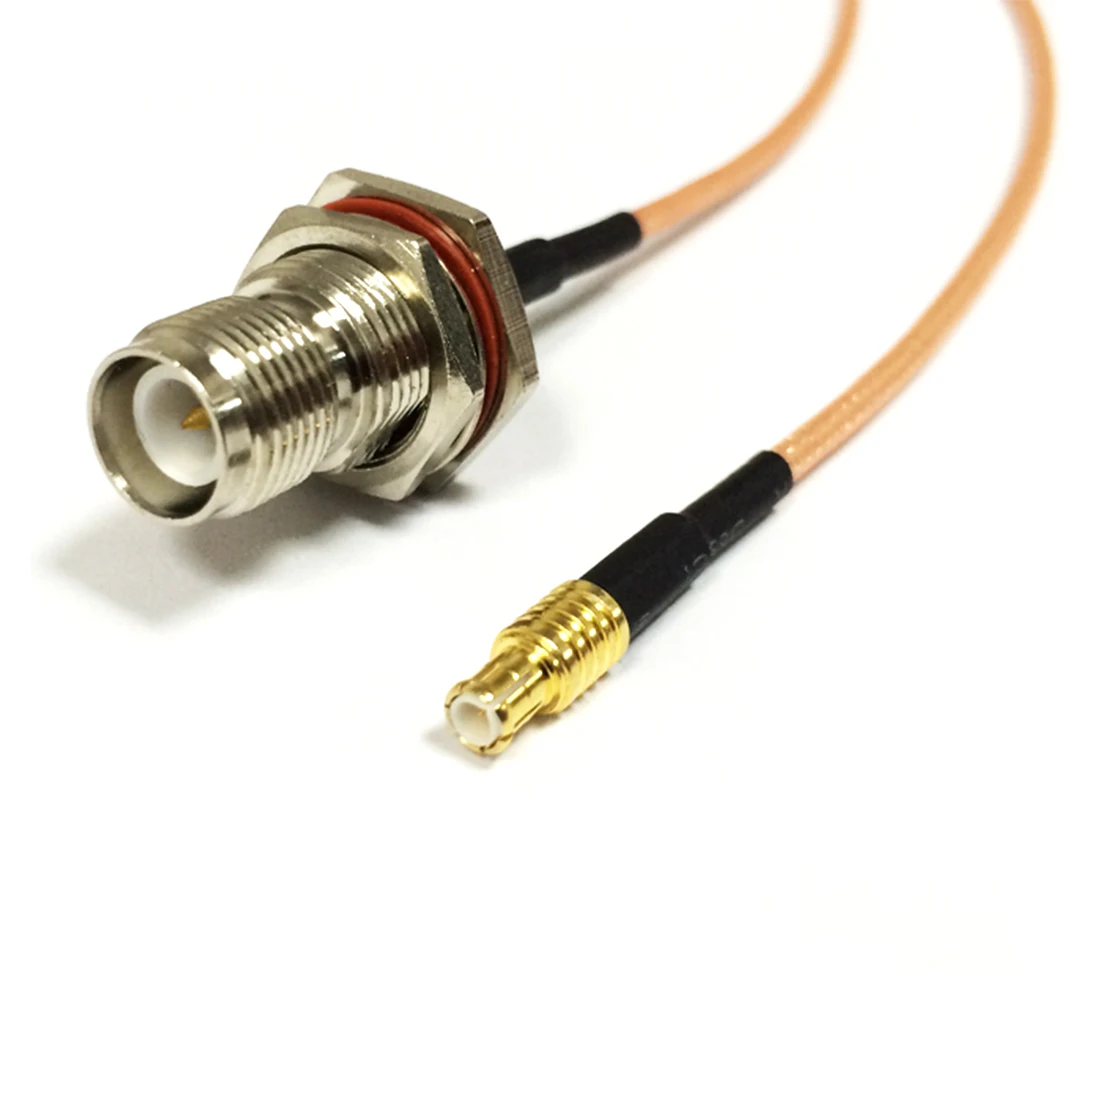 New Modem Coaxial Cable RP-TNC Female Jack To MCX Male Plug Connector RG316 Pigtail Adapter 15CM 6